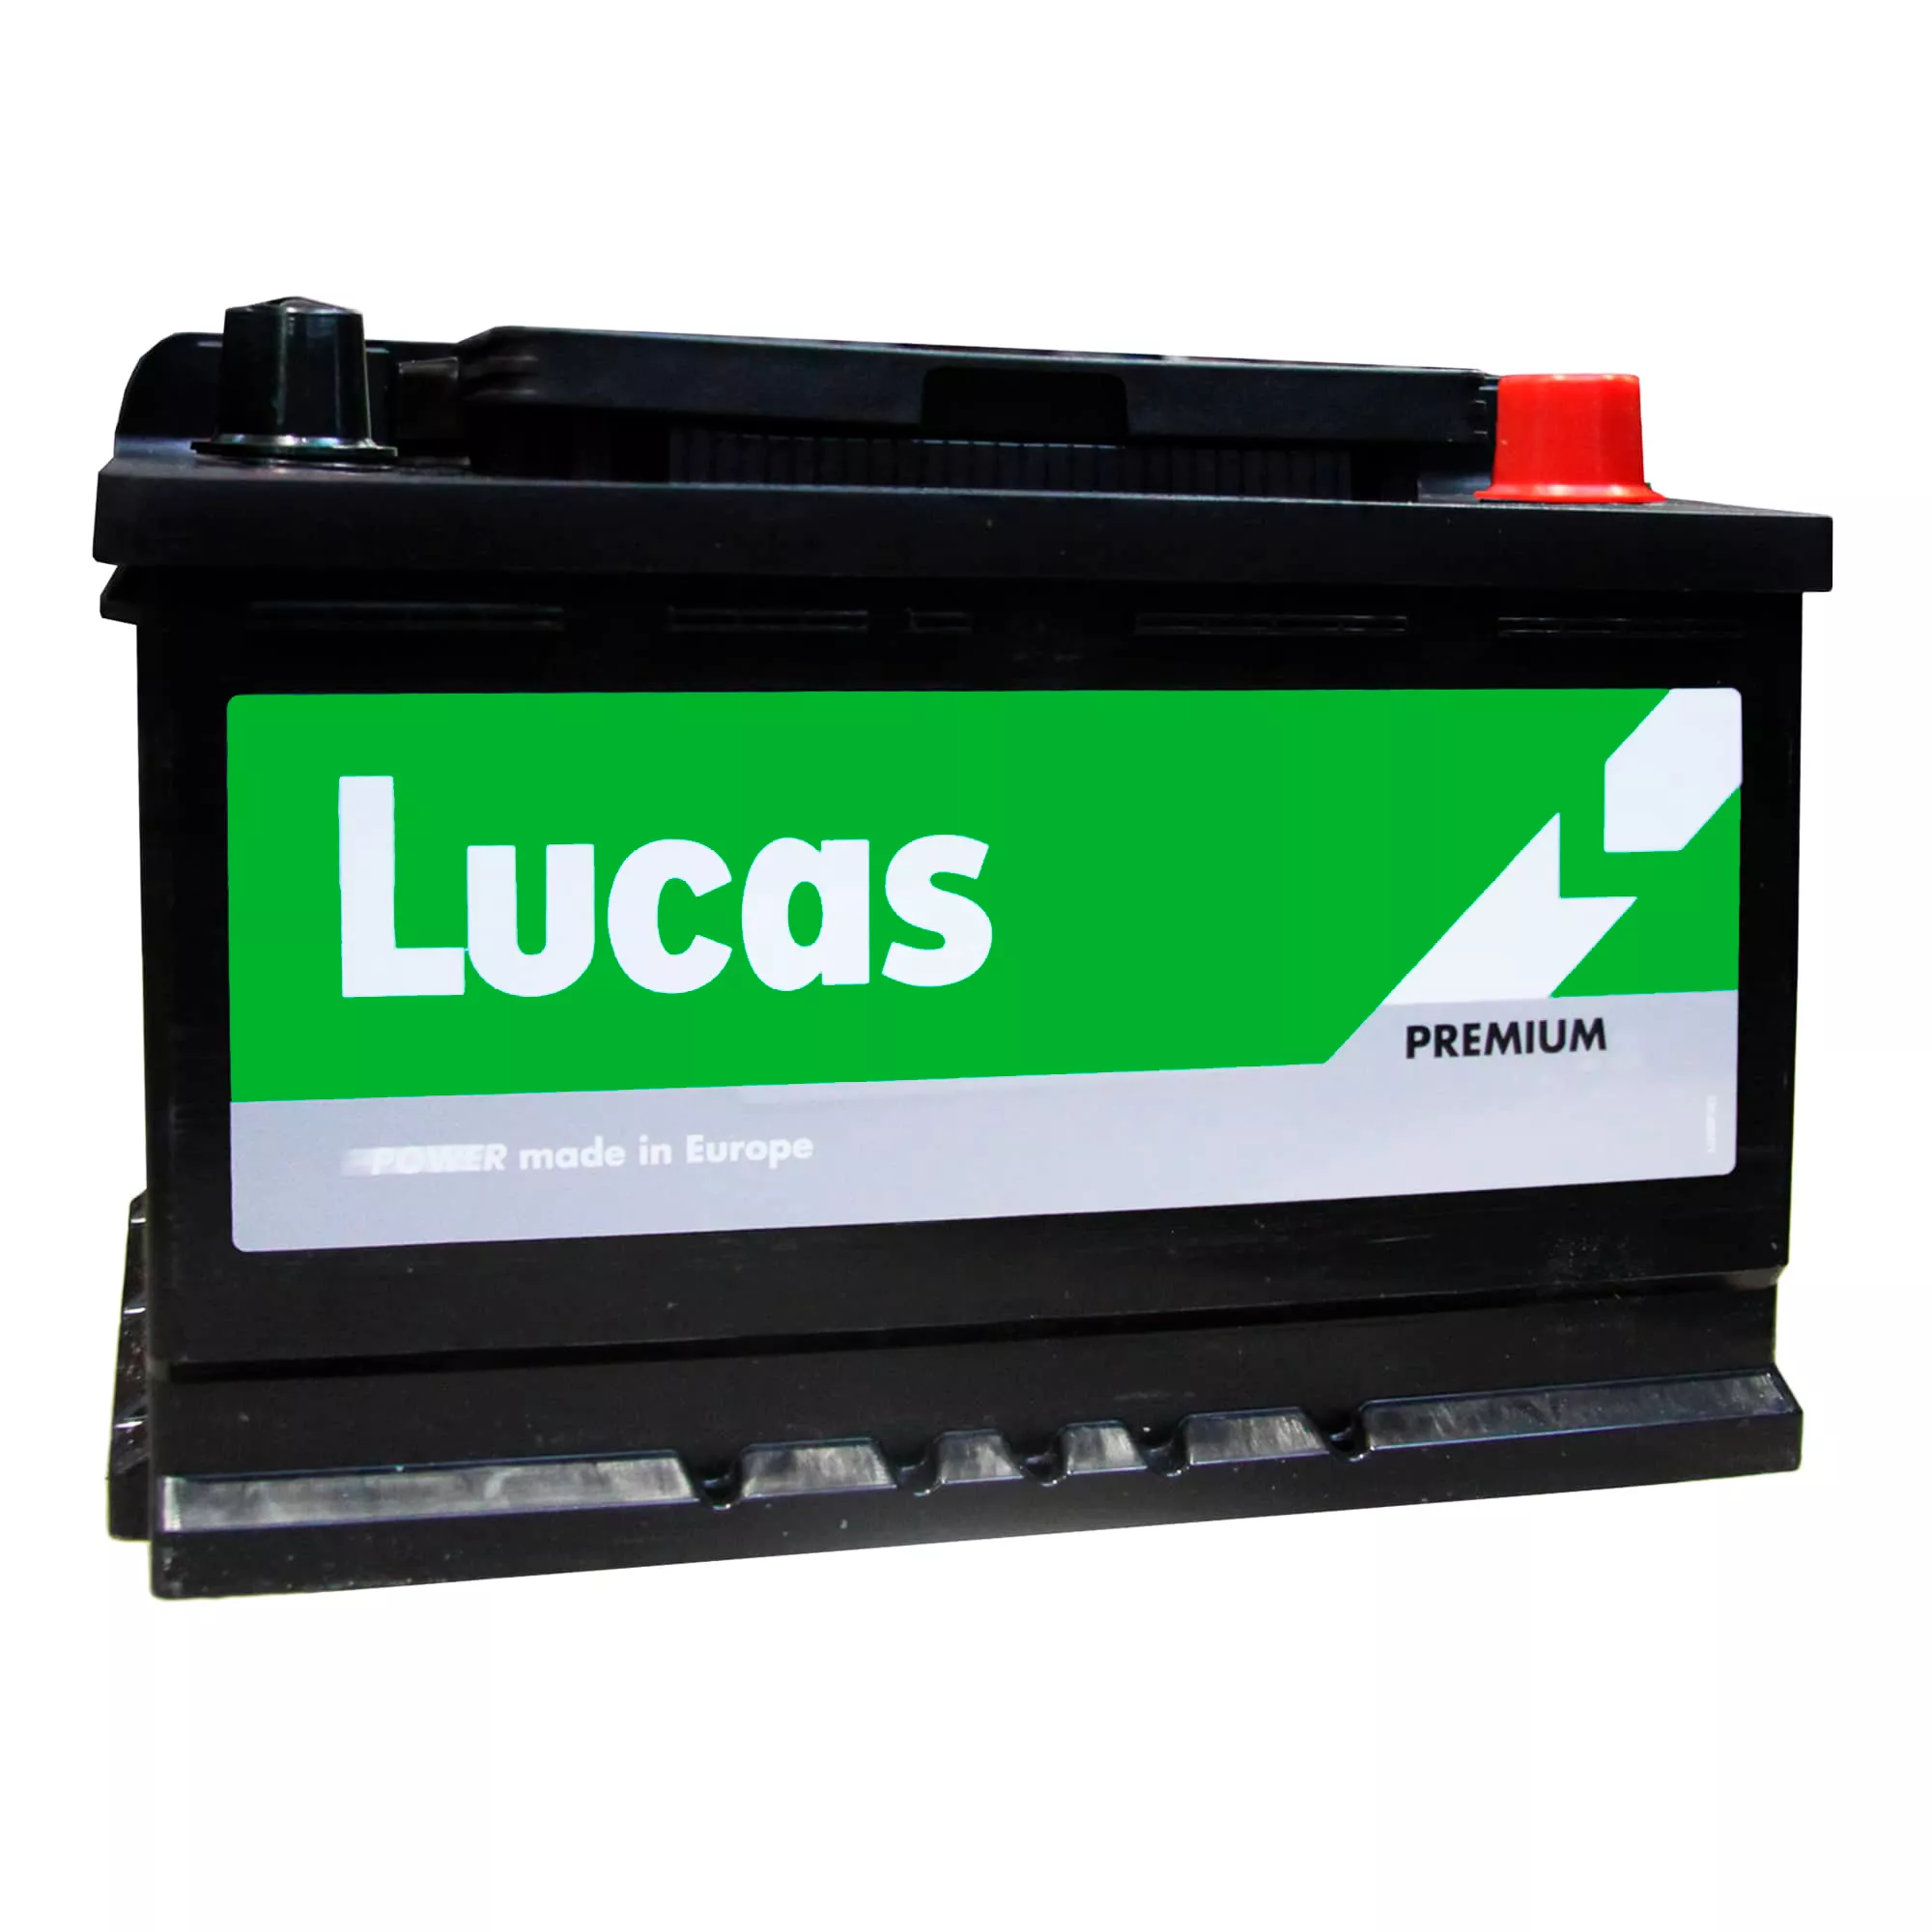 Аккумулятор Lucas (Batteries manufactured by Exide in Spain) 6CT-74 АзЕ (LBM007A)